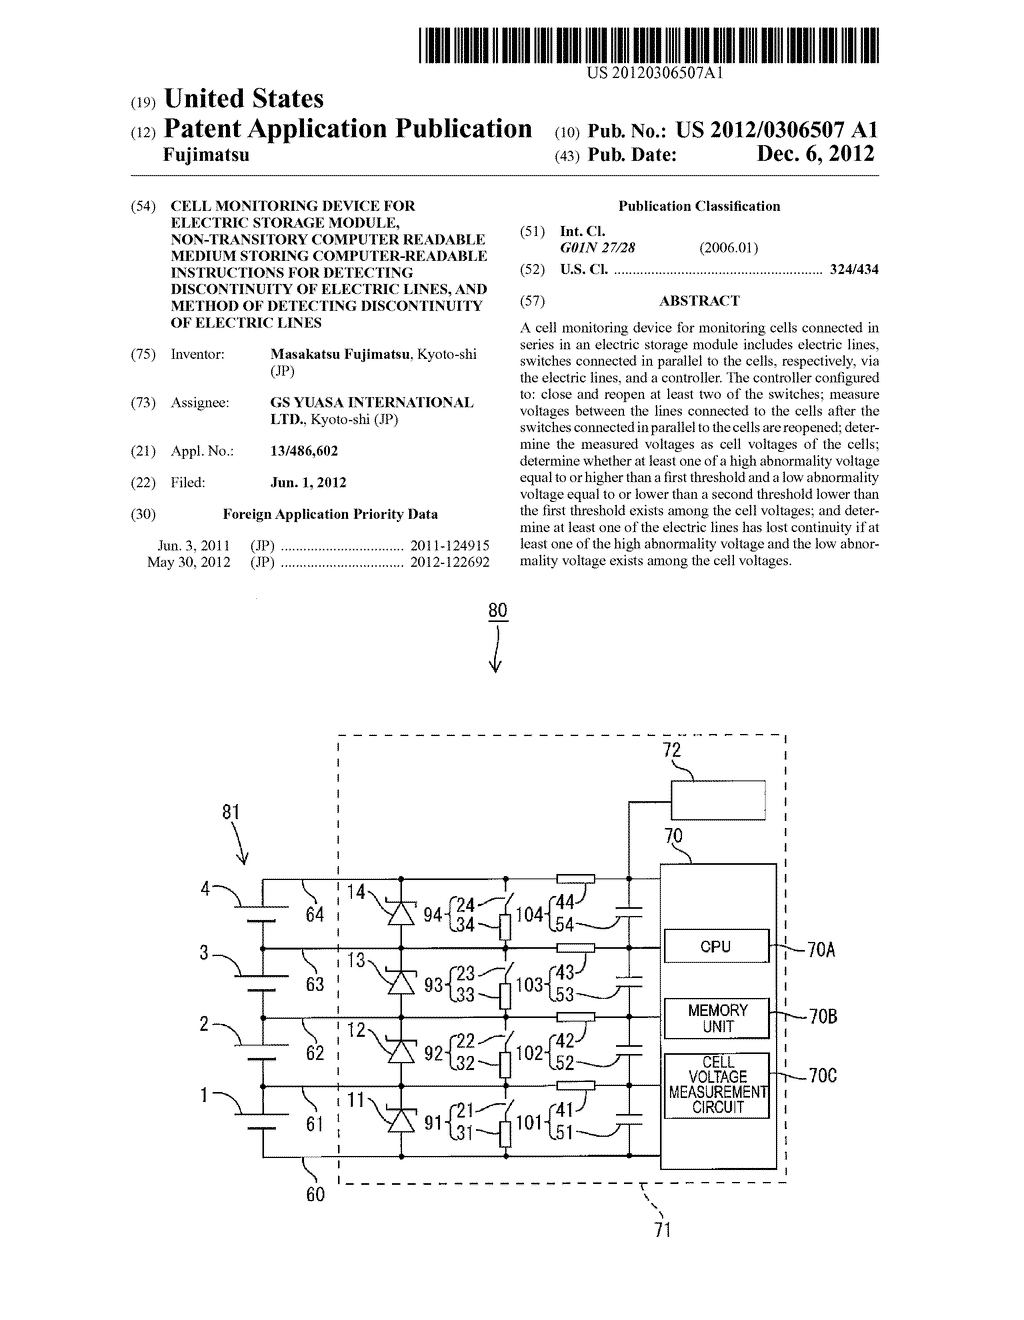 CELL MONITORING DEVICE FOR ELECTRIC STORAGE MODULE, NON-TRANSITORY     COMPUTER READABLE MEDIUM STORING COMPUTER-READABLE INSTRUCTIONS FOR     DETECTING DISCONTINUITY OF ELECTRIC LINES, AND METHOD OF DETECTING     DISCONTINUITY OF ELECTRIC LINES - diagram, schematic, and image 01